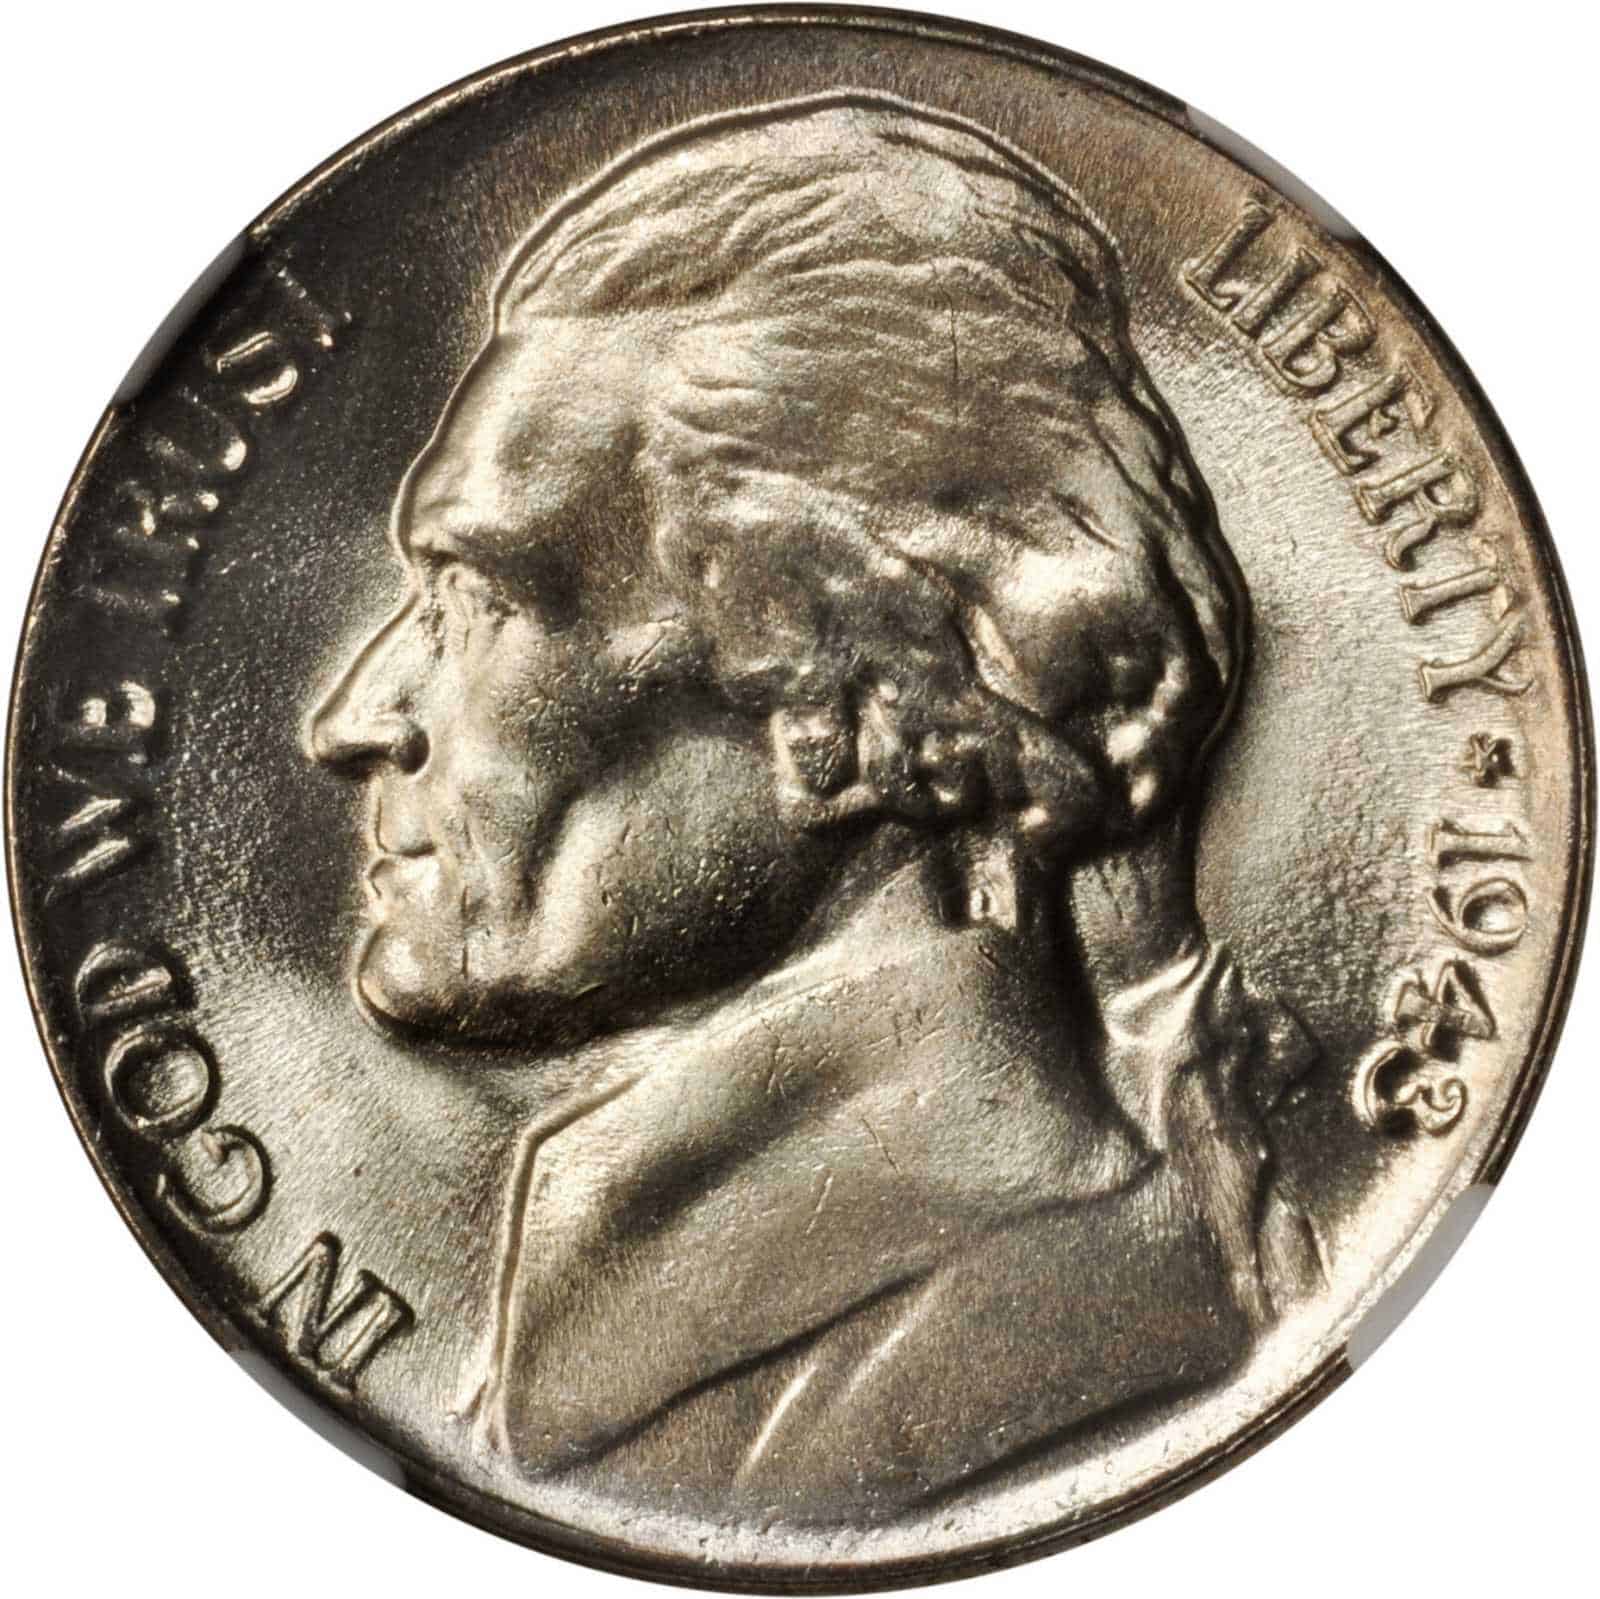 The Obverse of the 1943 Nickel